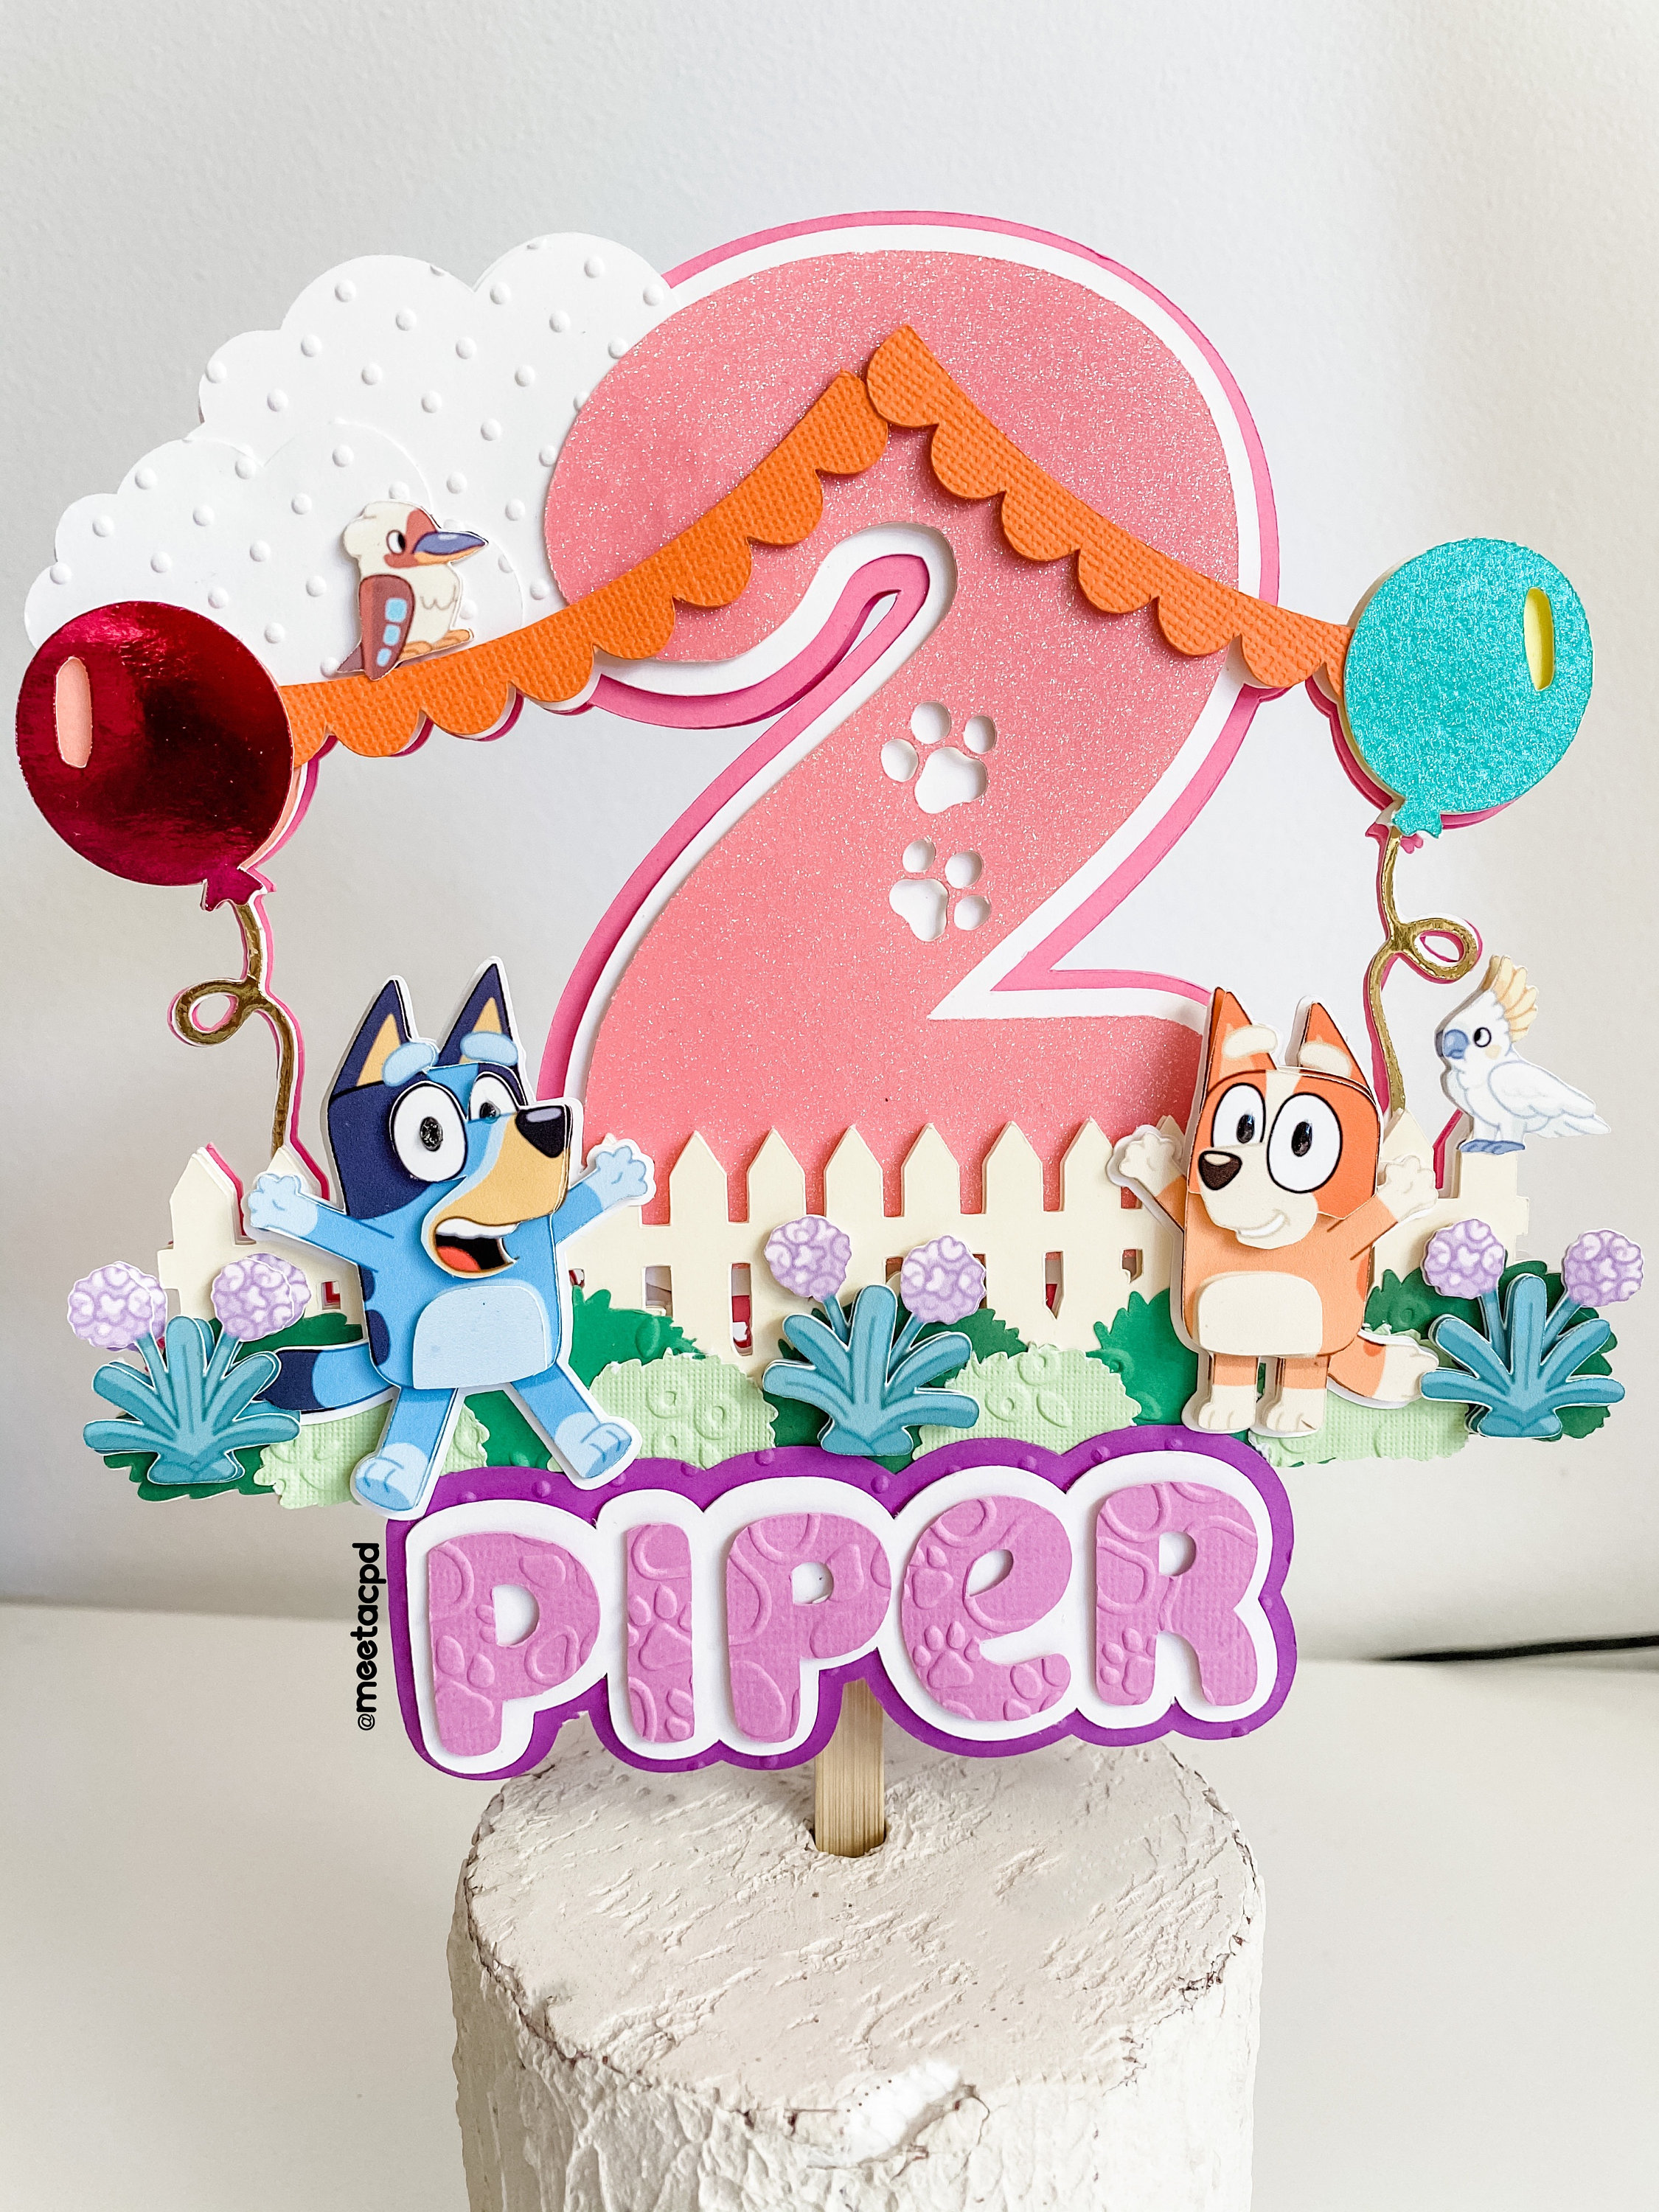 Bluey birthday party supplies ，Bluey Themed Birthday Party Decorations Set  includes happy birthday banner， cake topper ，birthday balloons for kids  birthday decorations